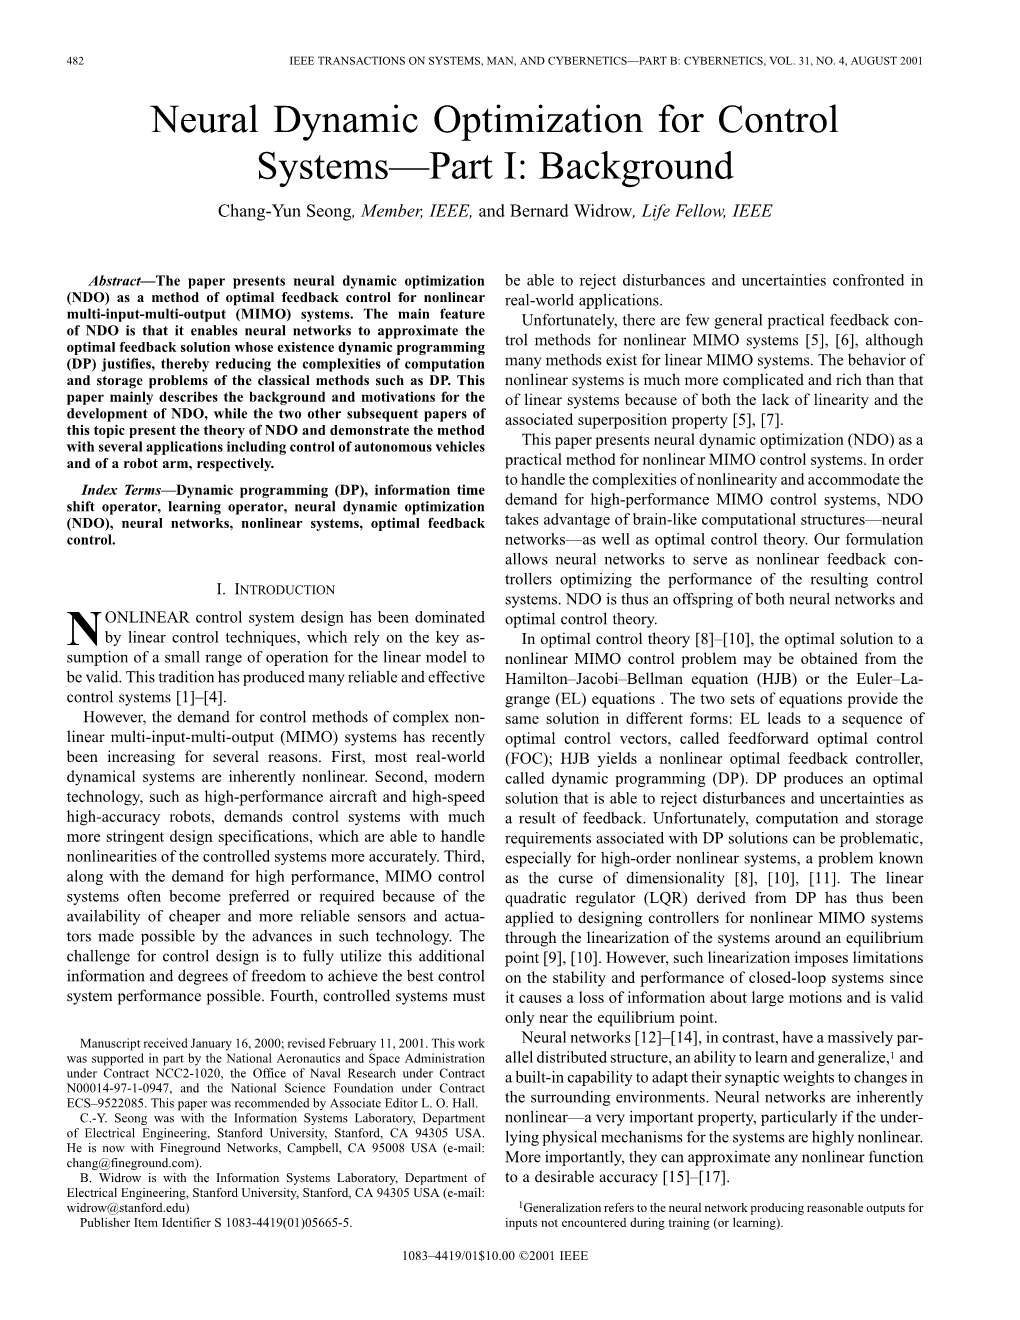 Neural Dynamic Optimization for Control Systems-Part I: Background